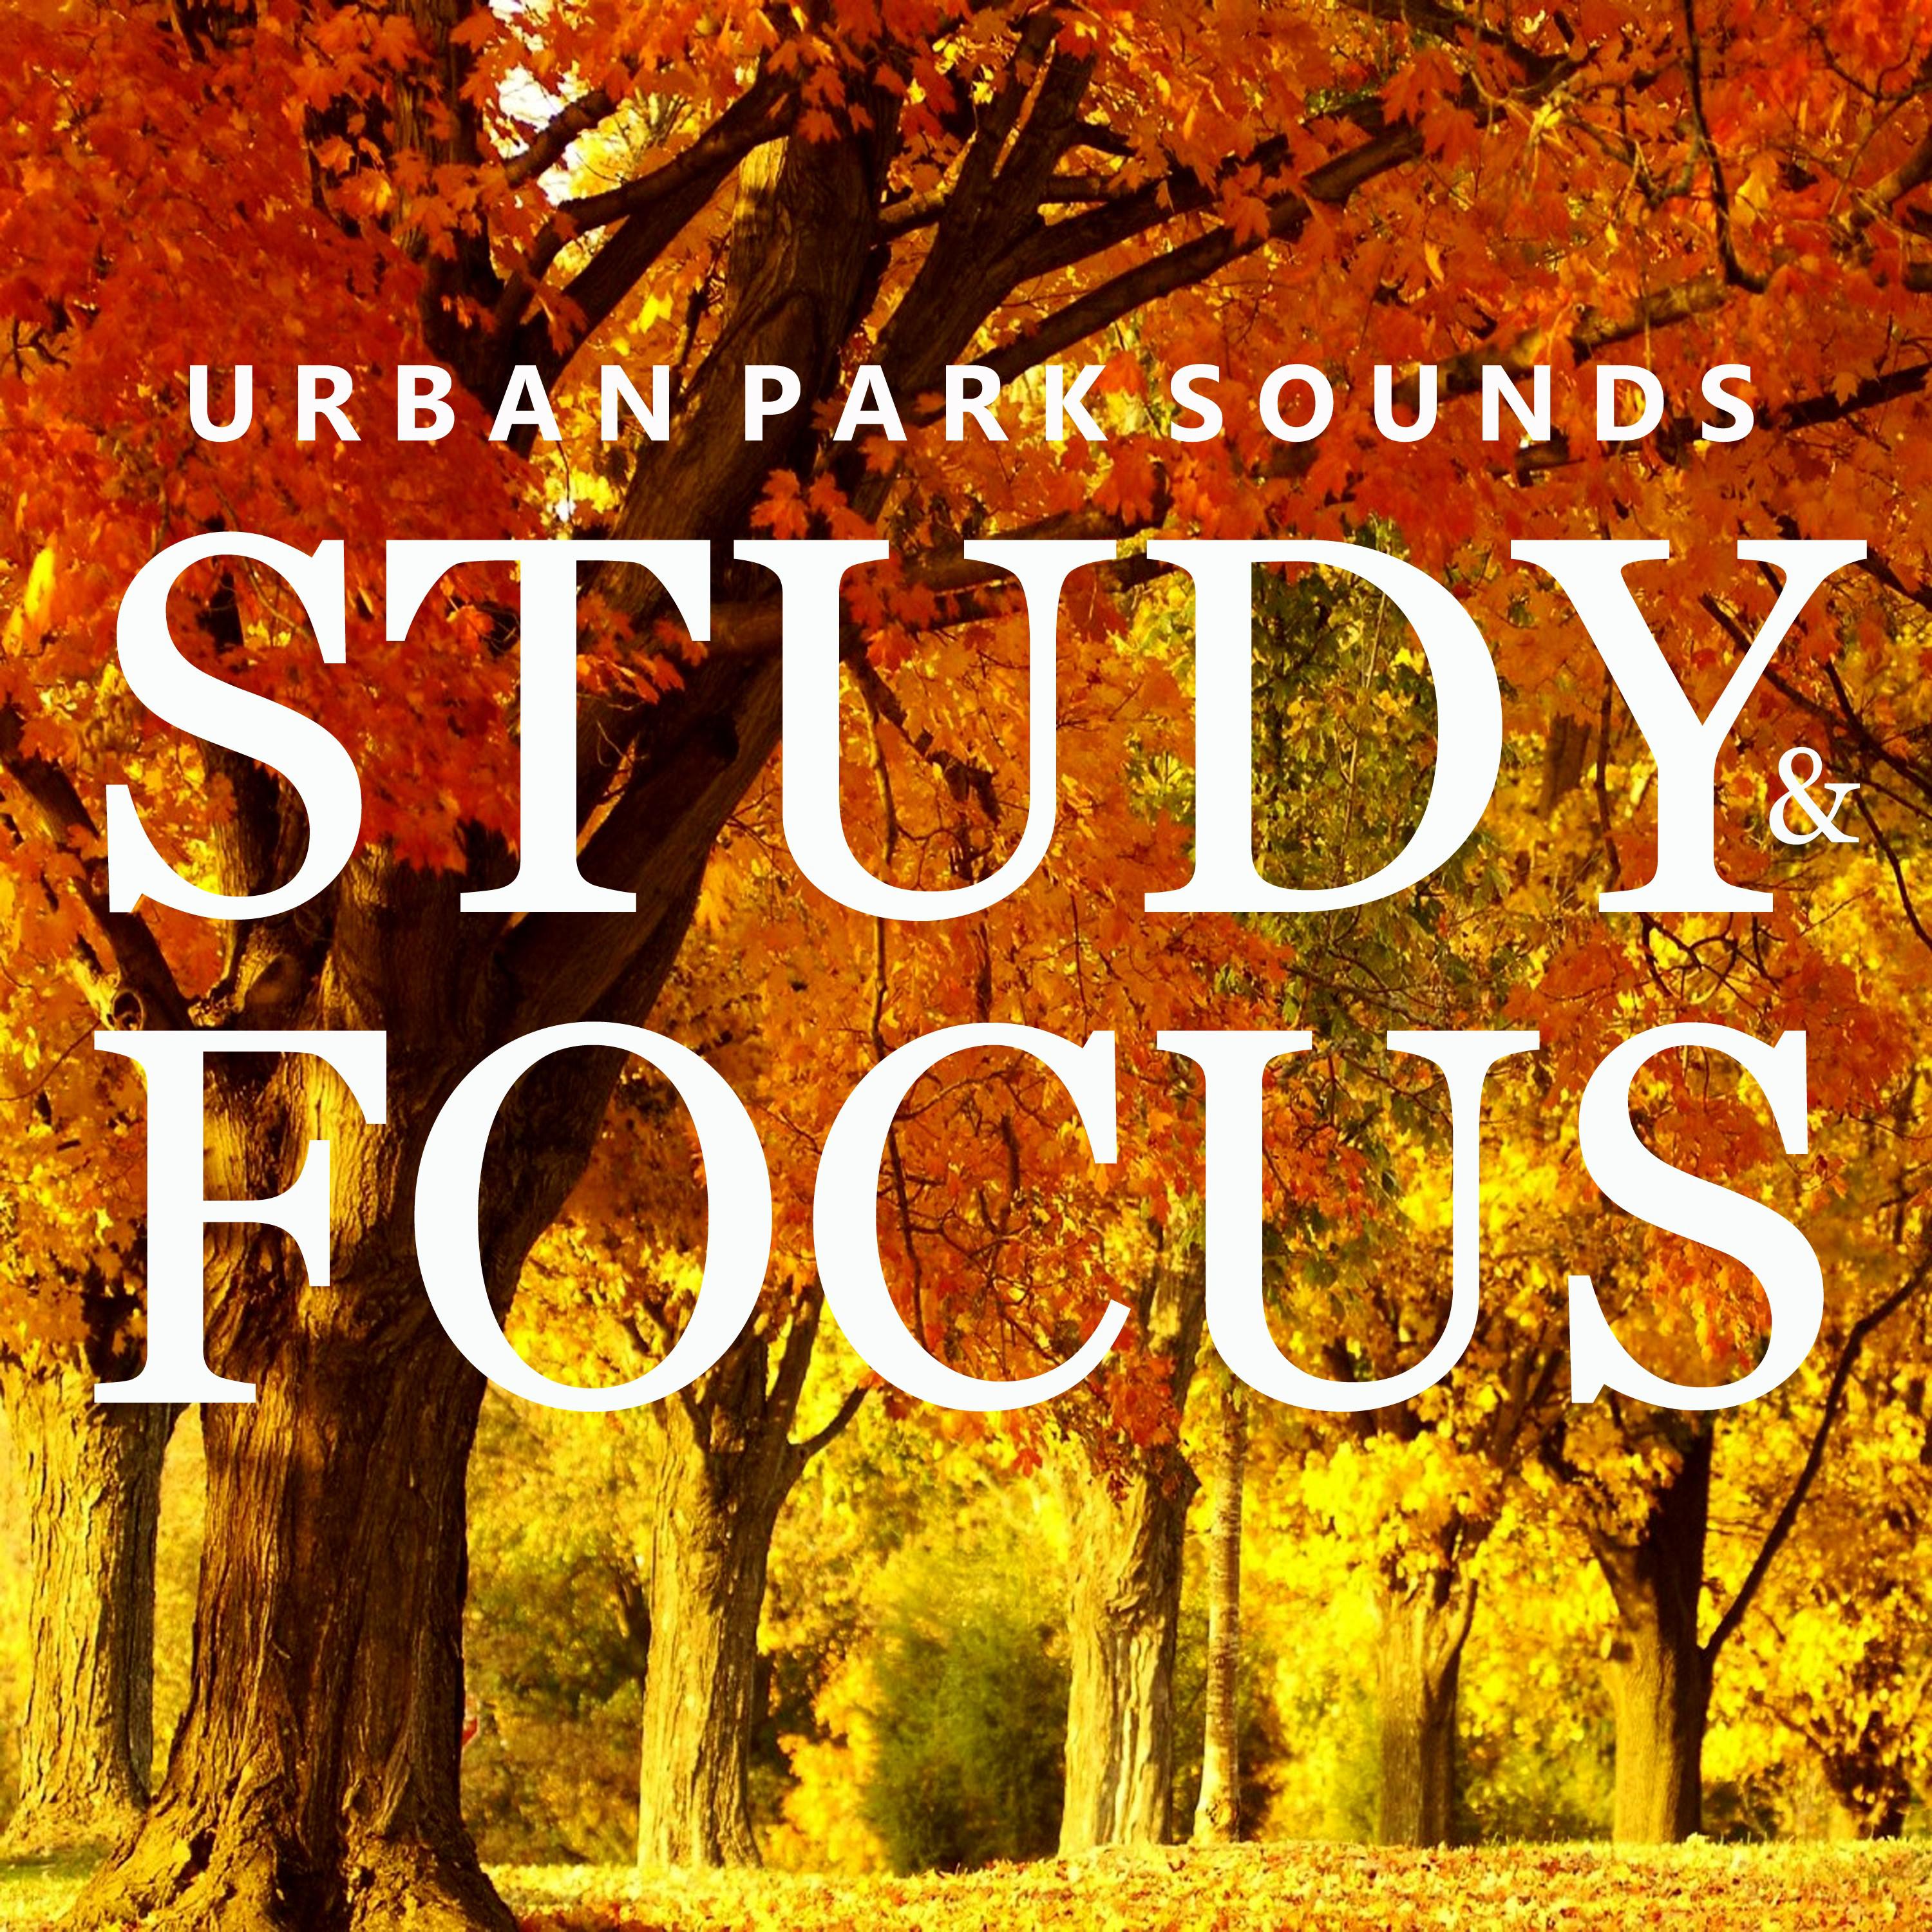 Urban Park Sounds for Studying, Pt. 06